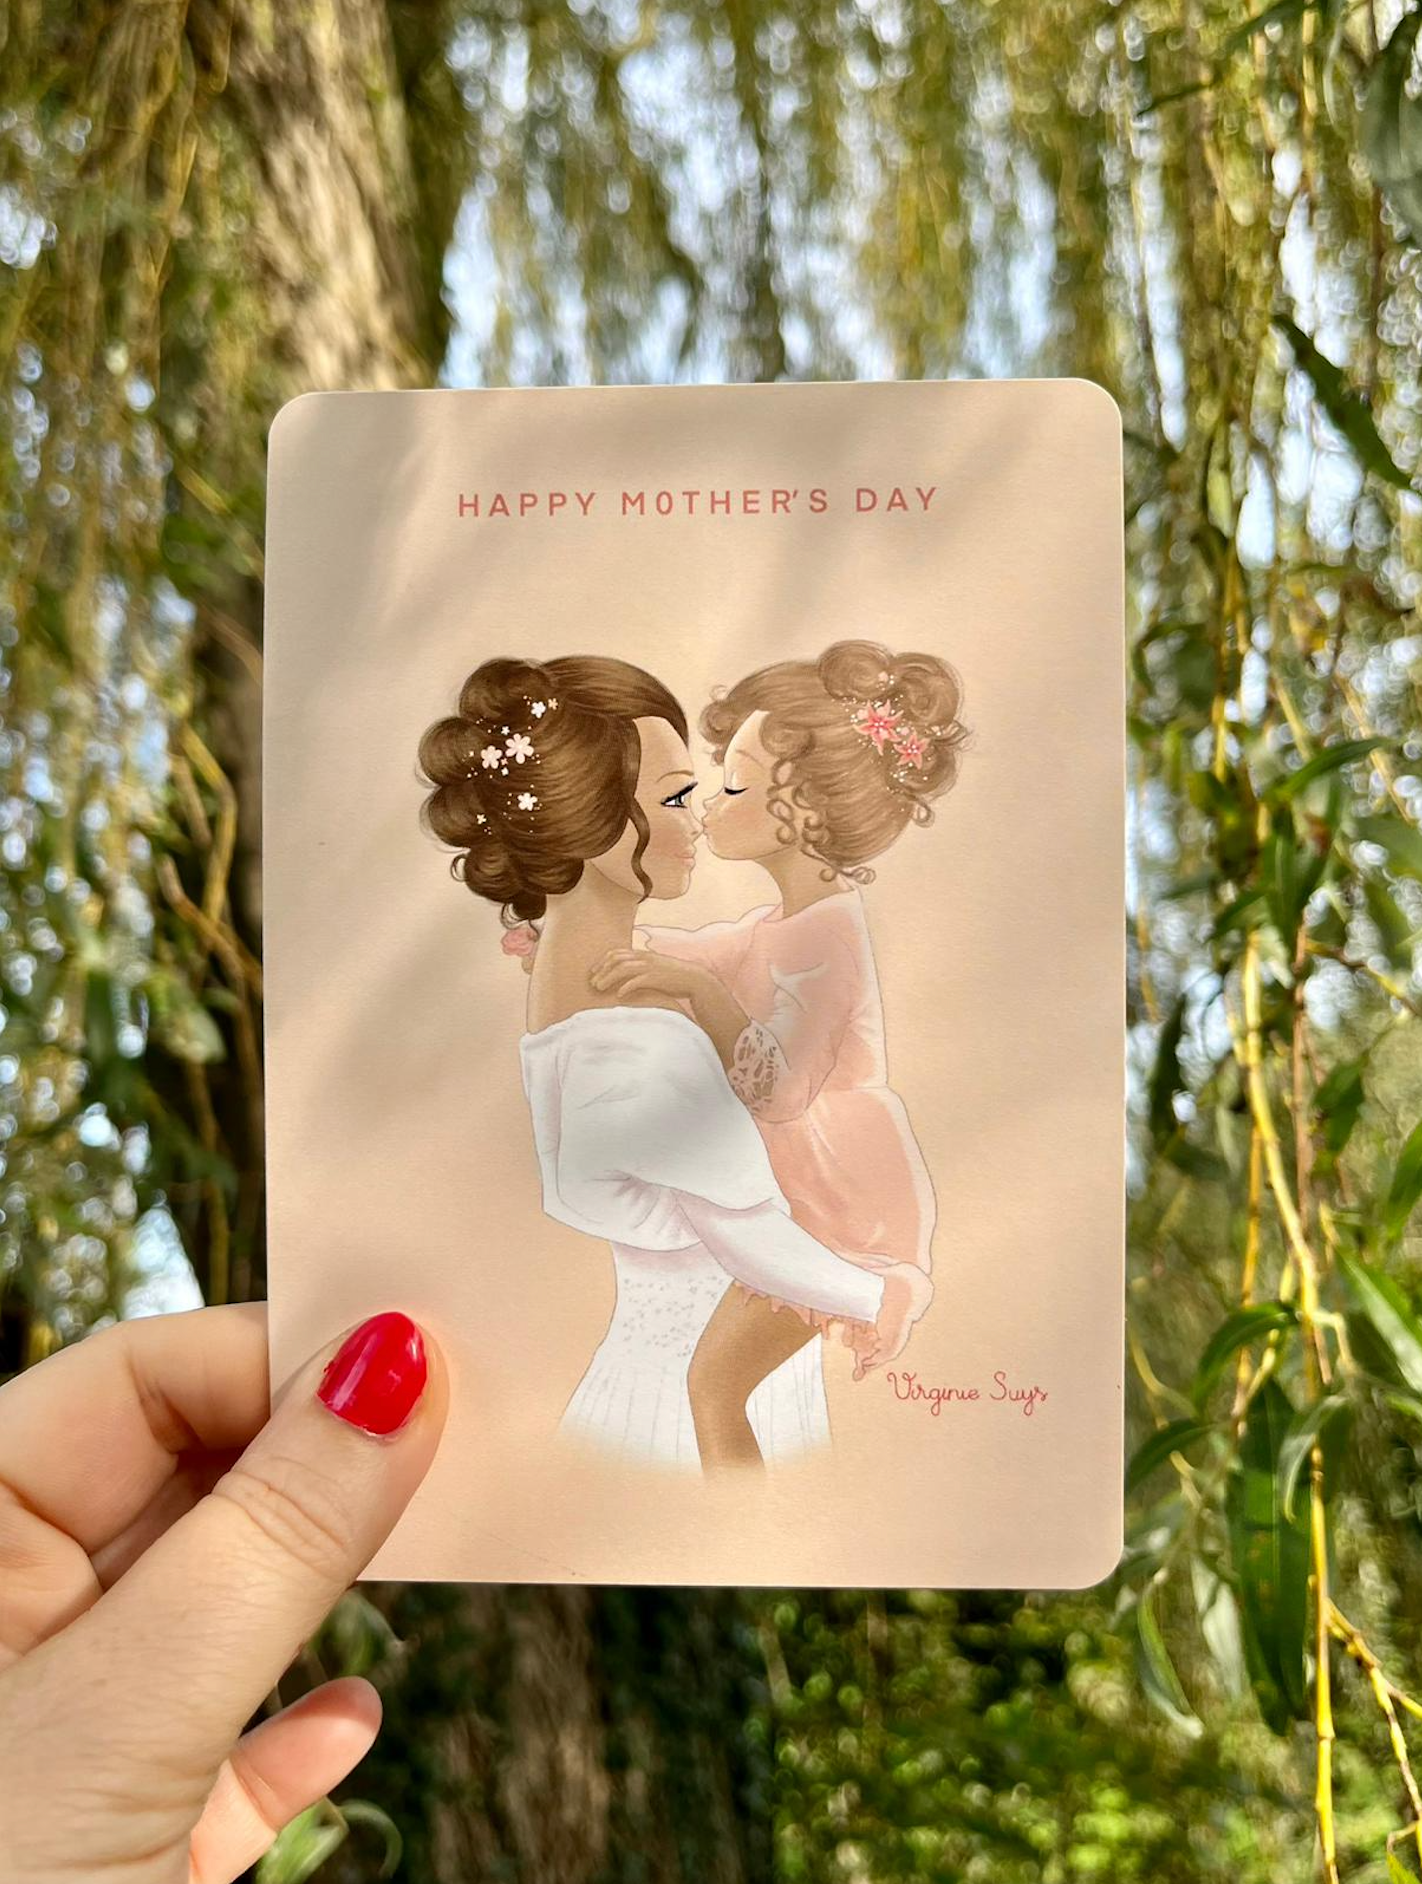 Wishcards - happy mother's day - girl with pink dress